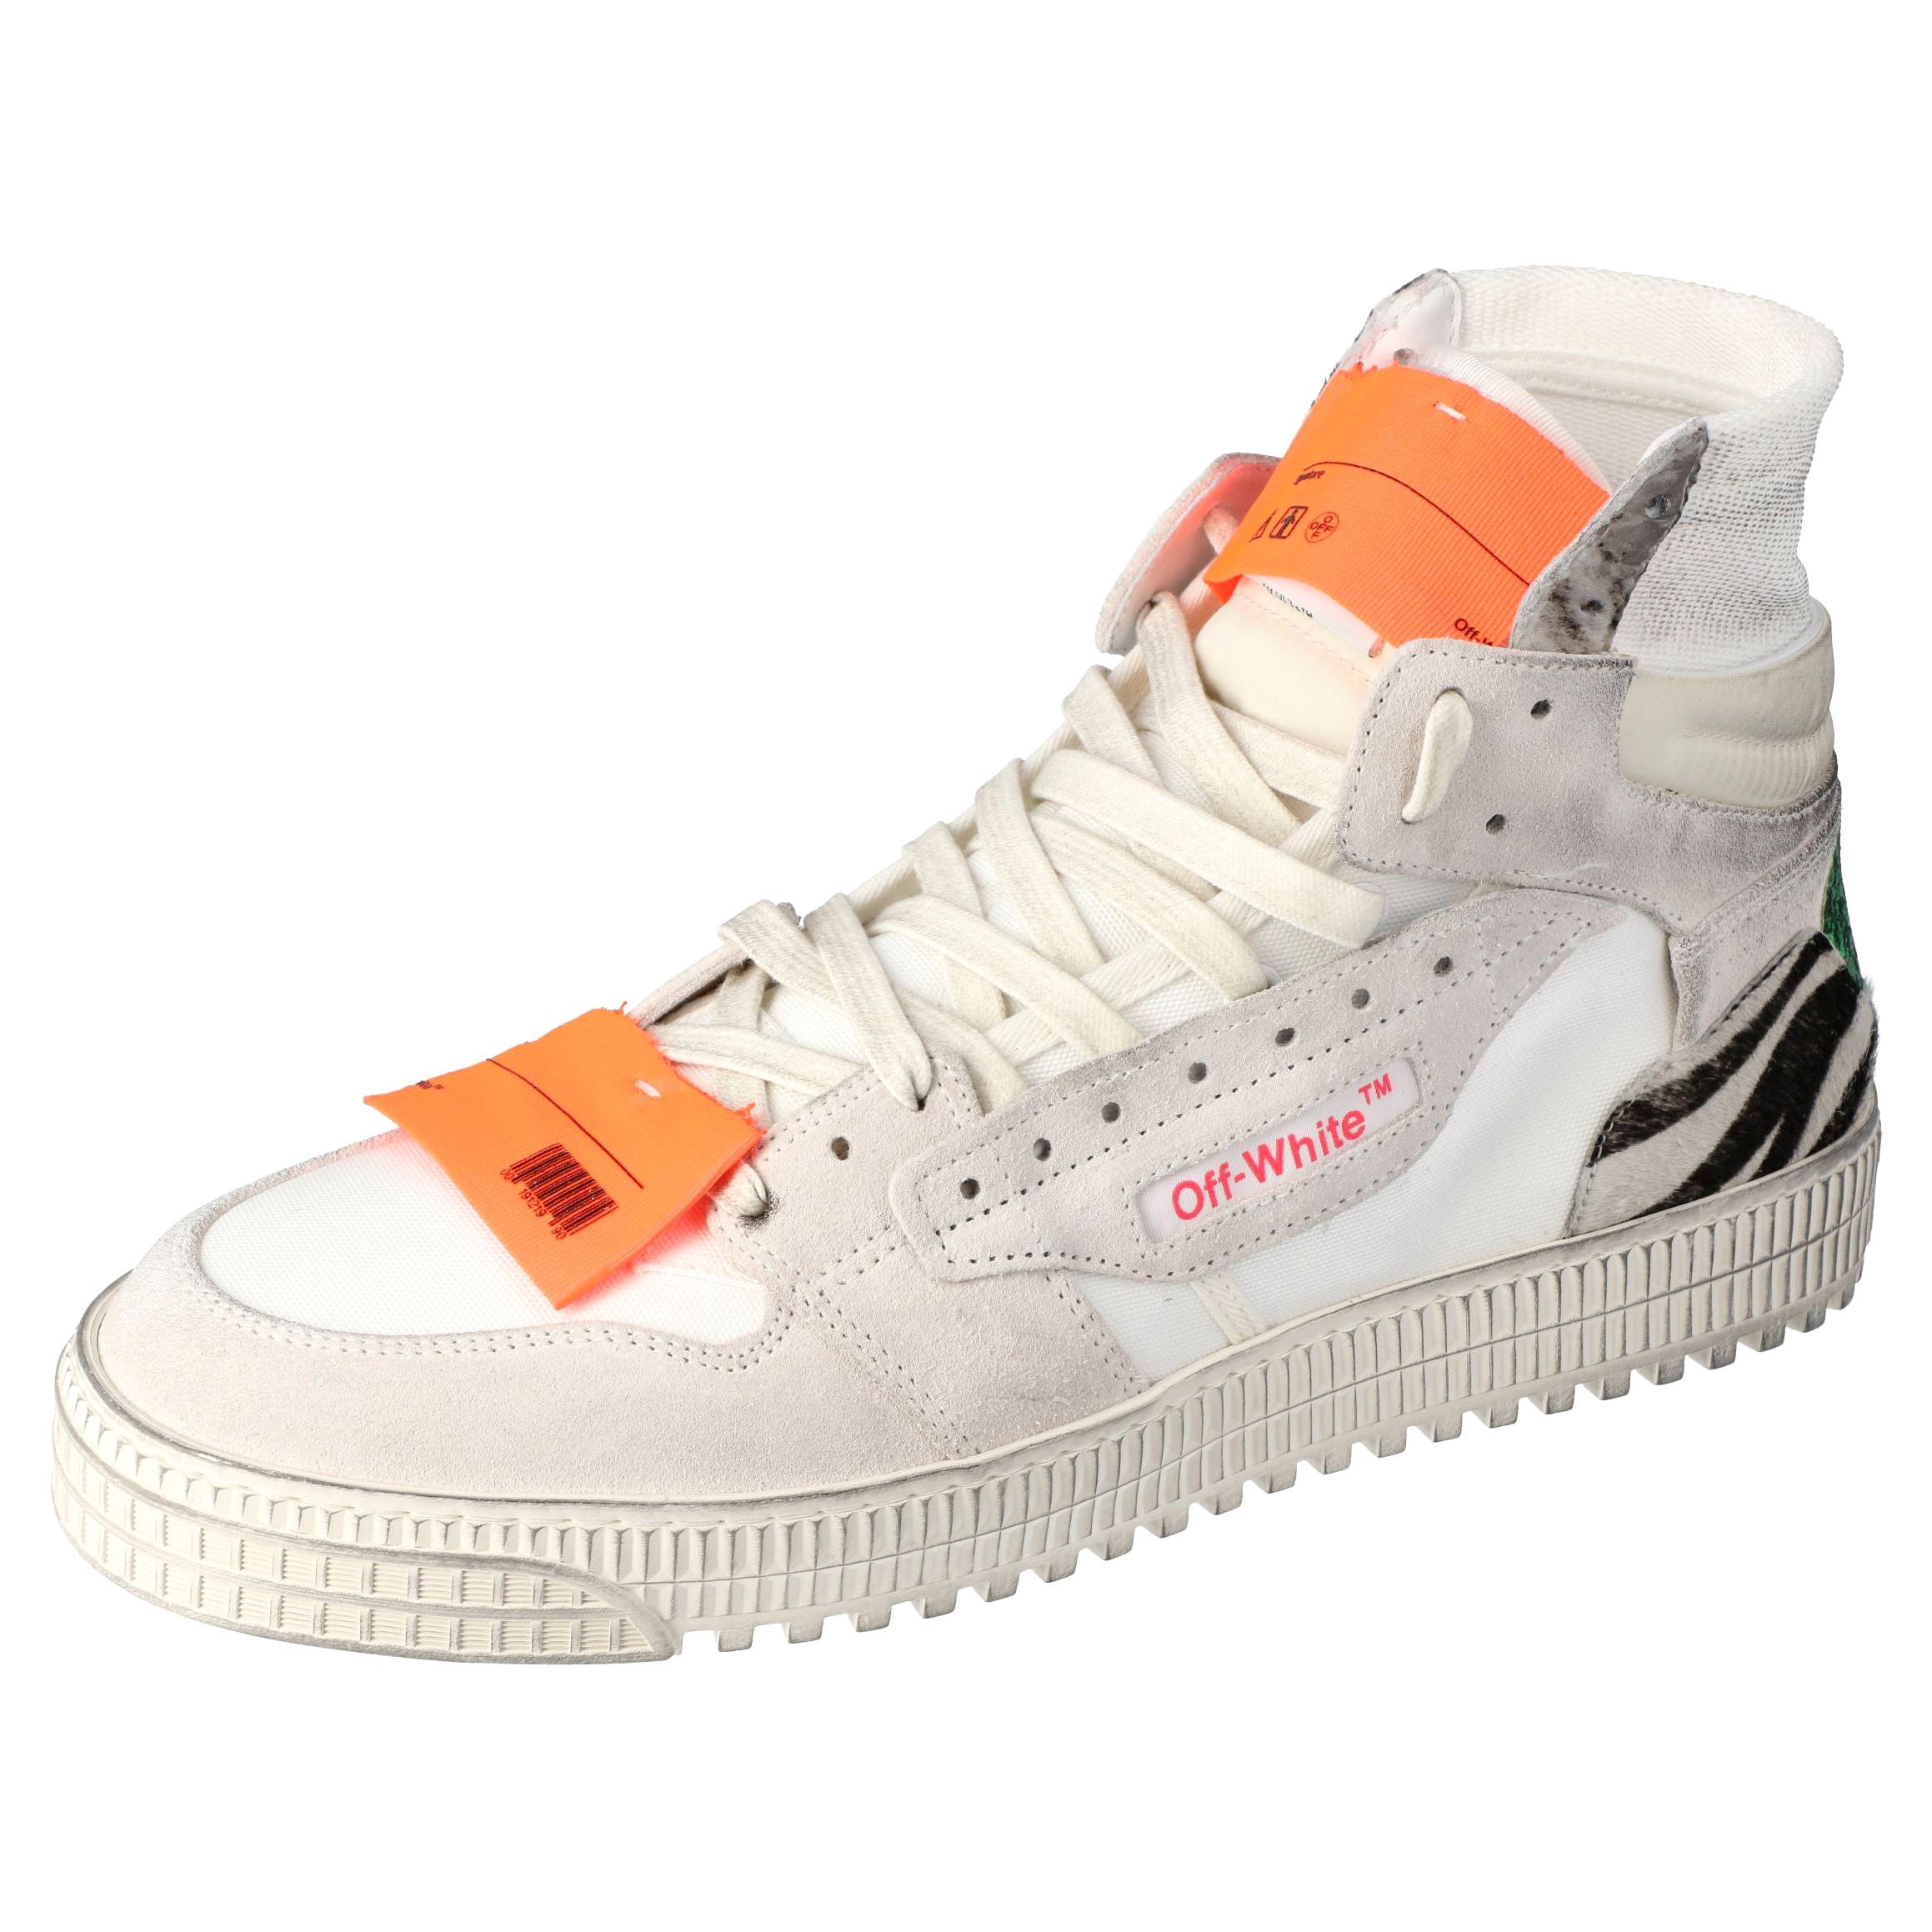 Off White Mix Media High Top Sneakers Size 40